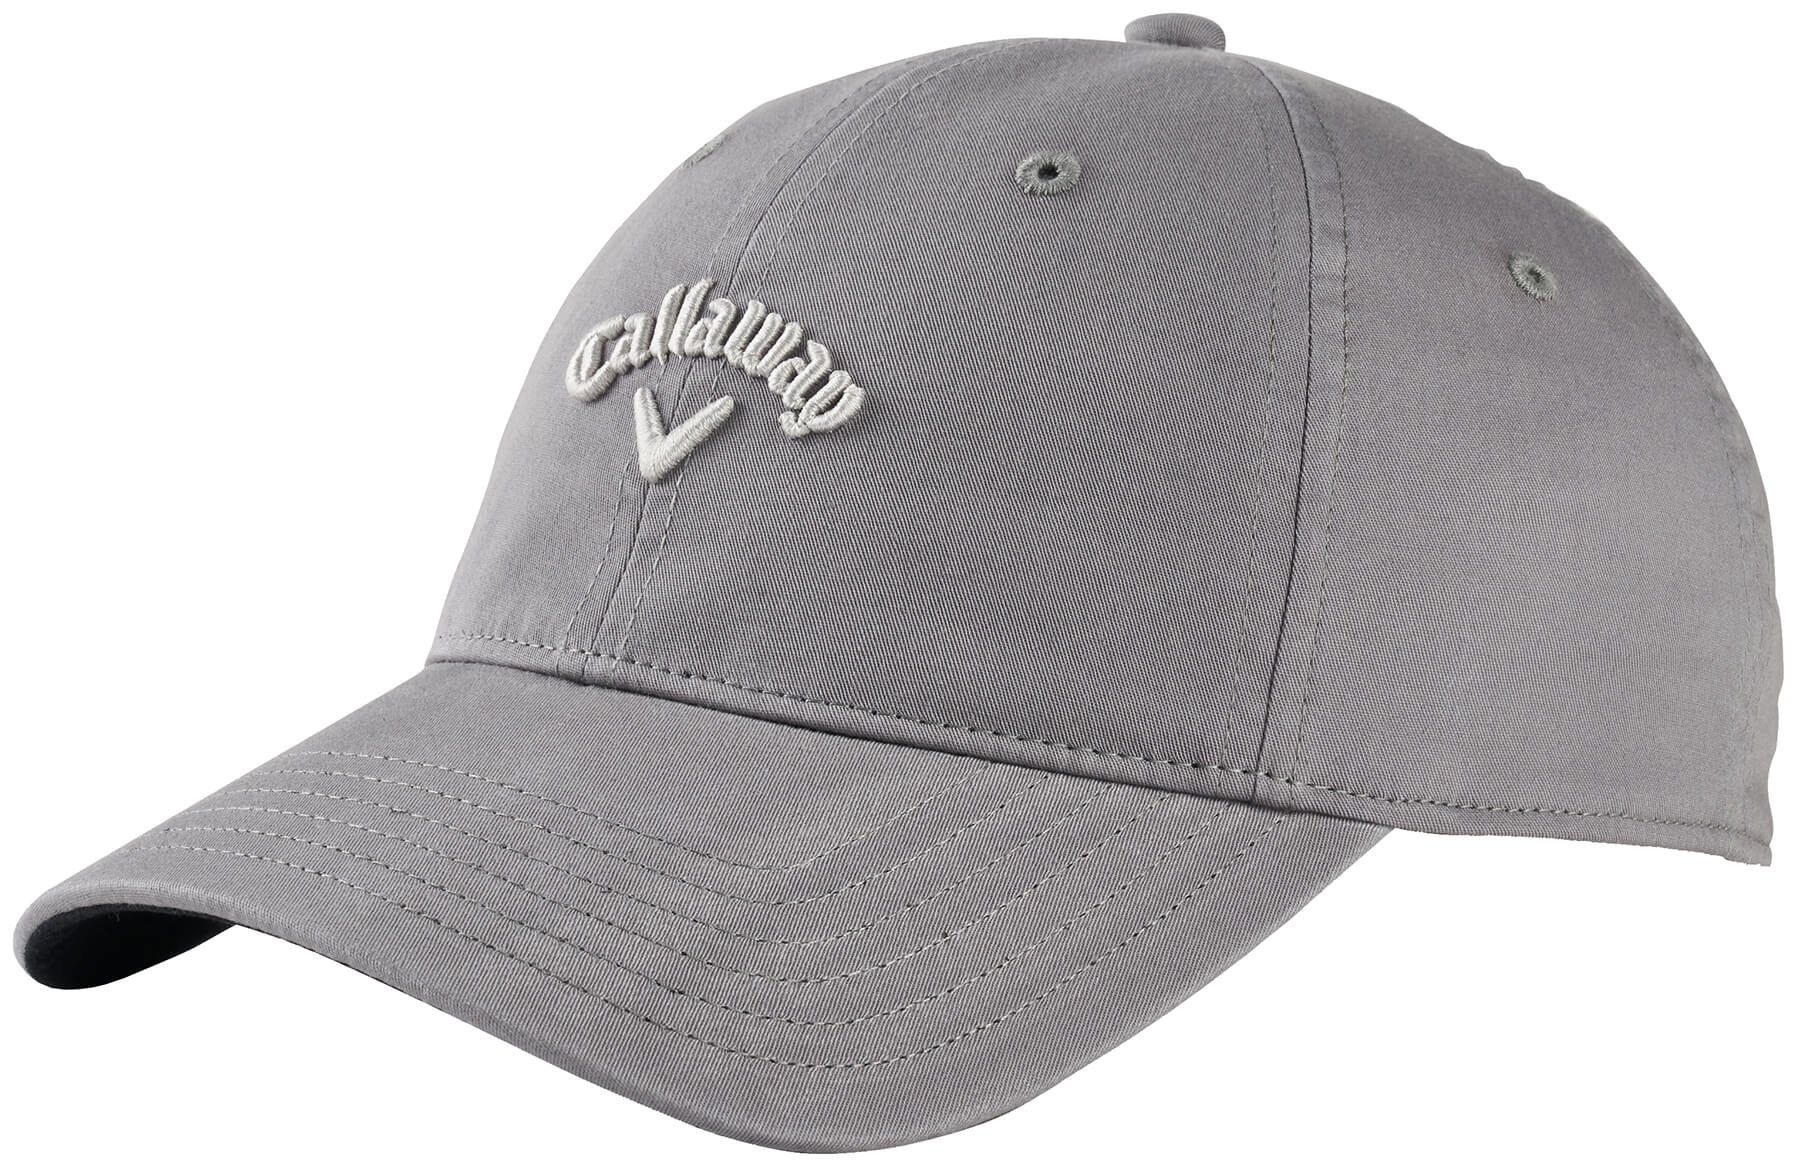 Save 22% on Callaway Women's Heritage Twill Golf Hat In Grey/silver